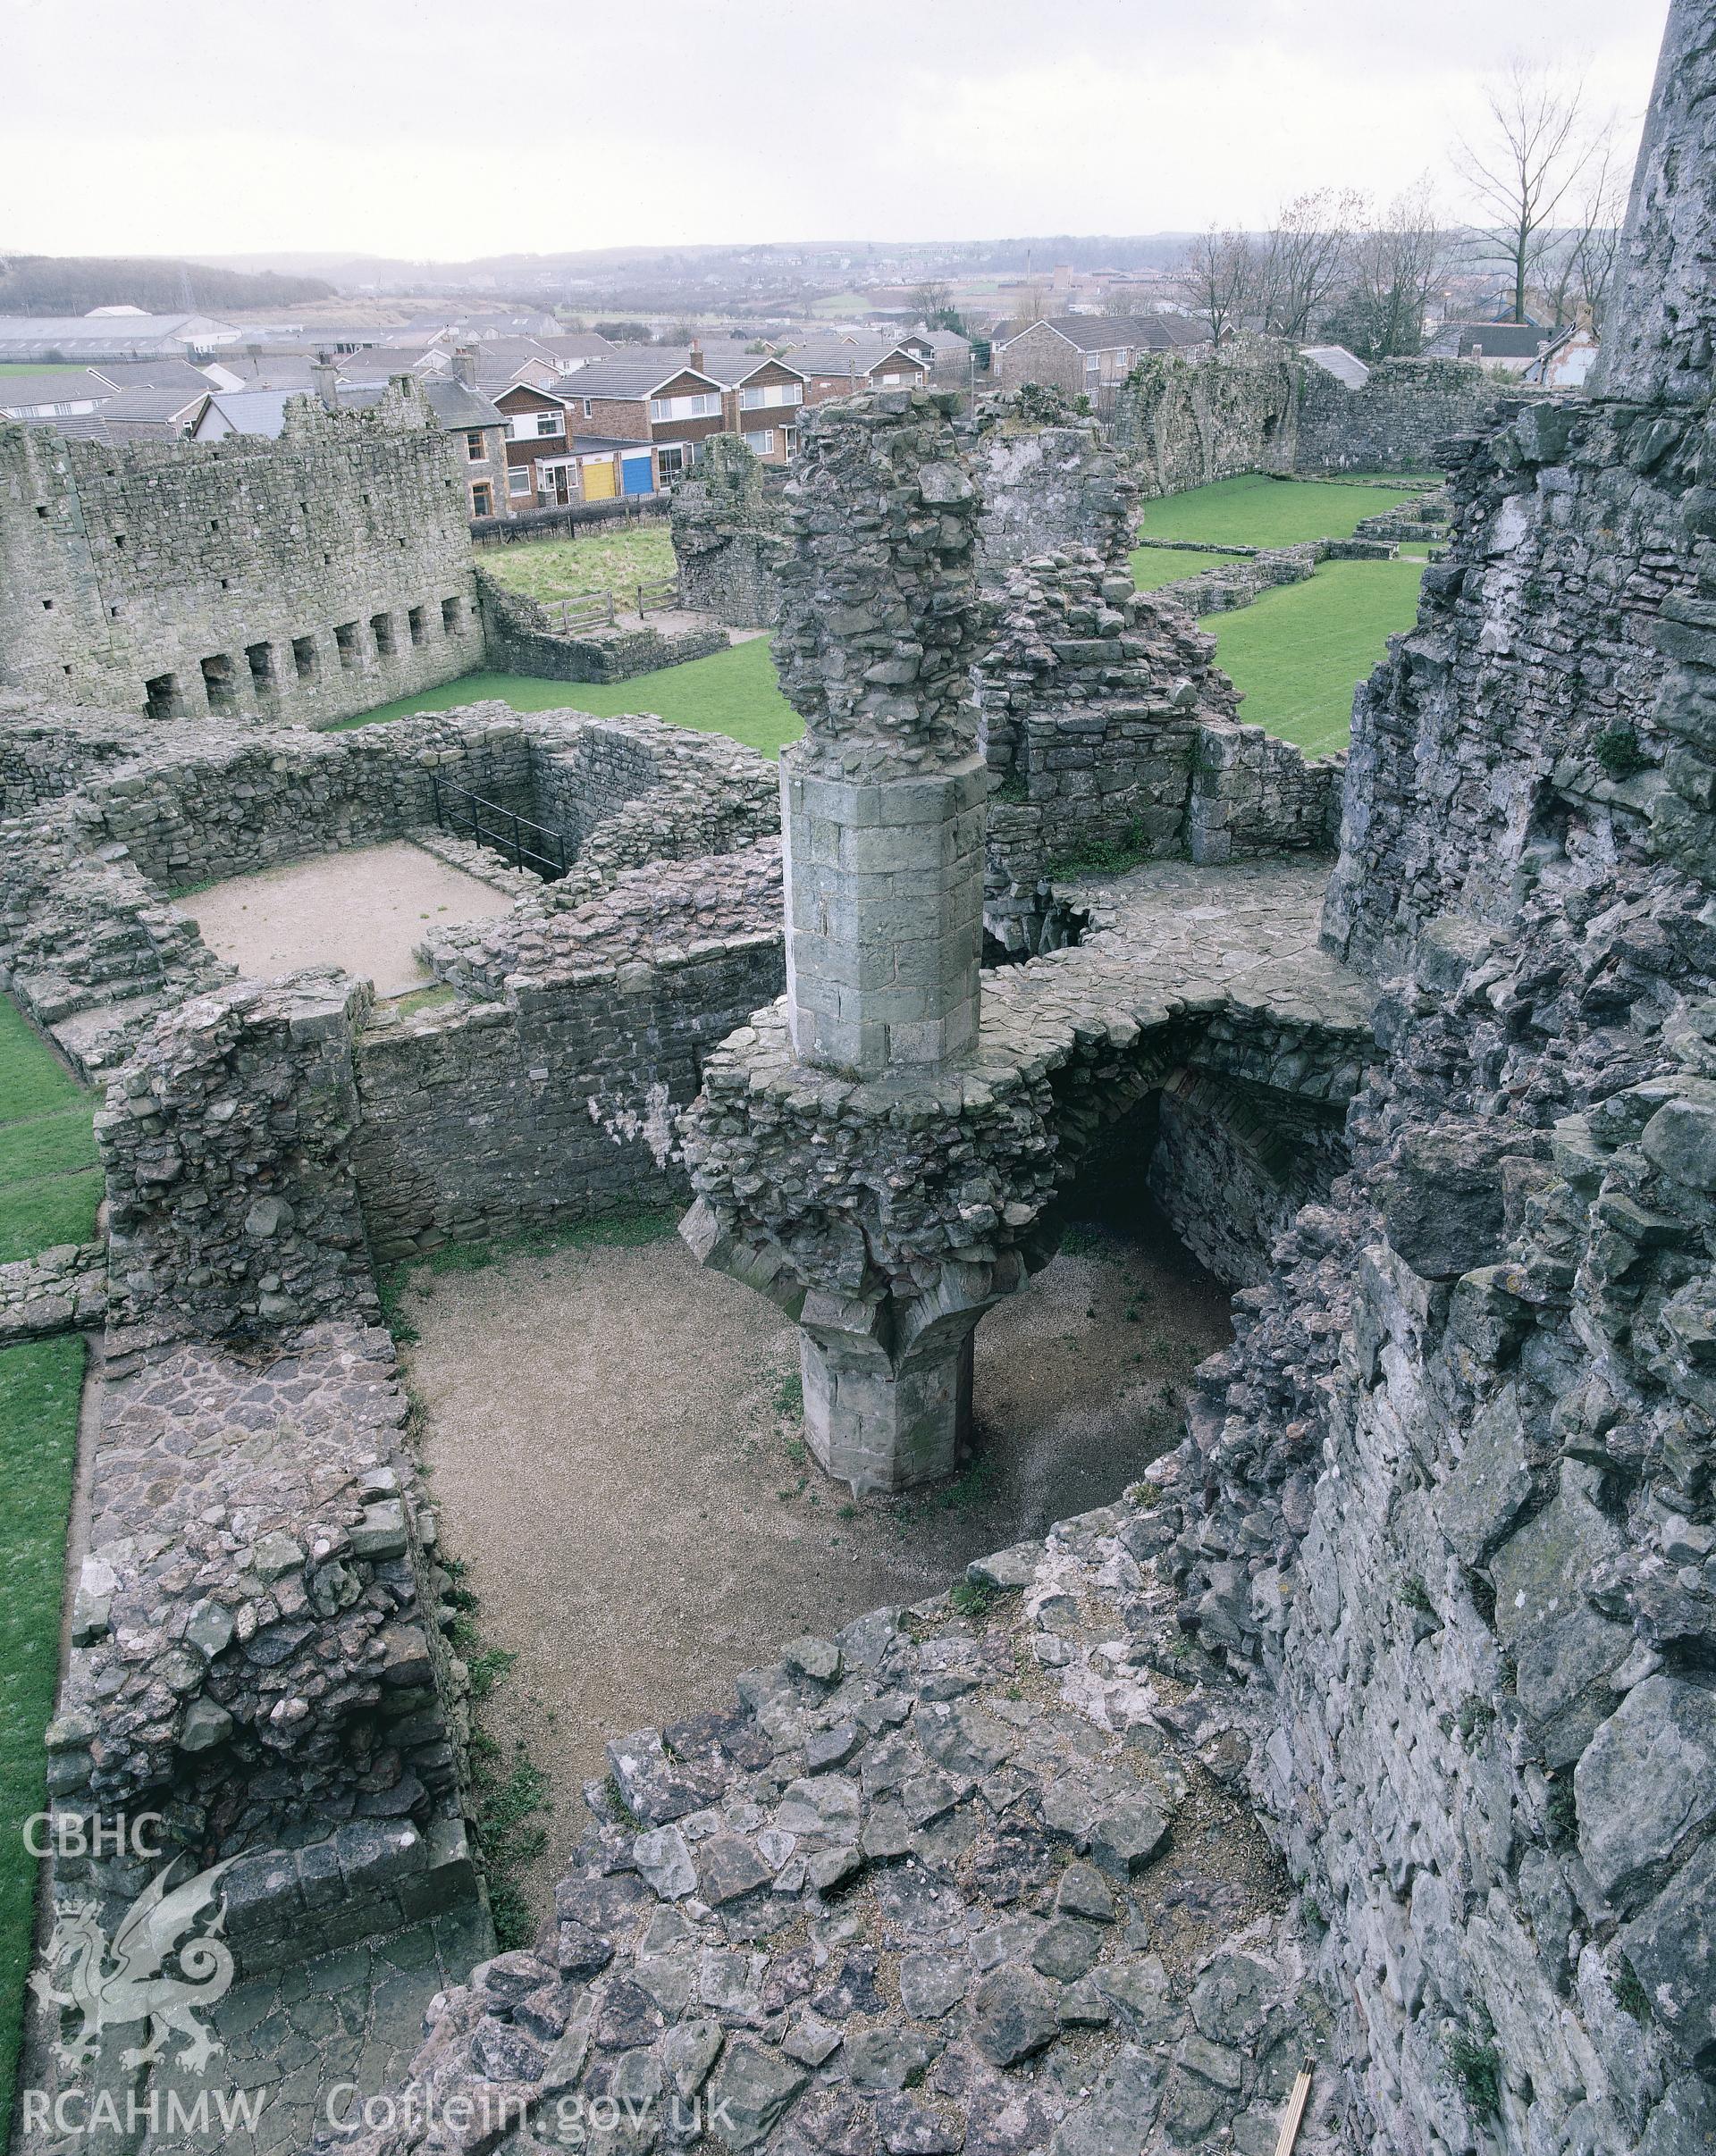 RCAHMW colour transparency showing view of Coity Castle from a high viewpoint